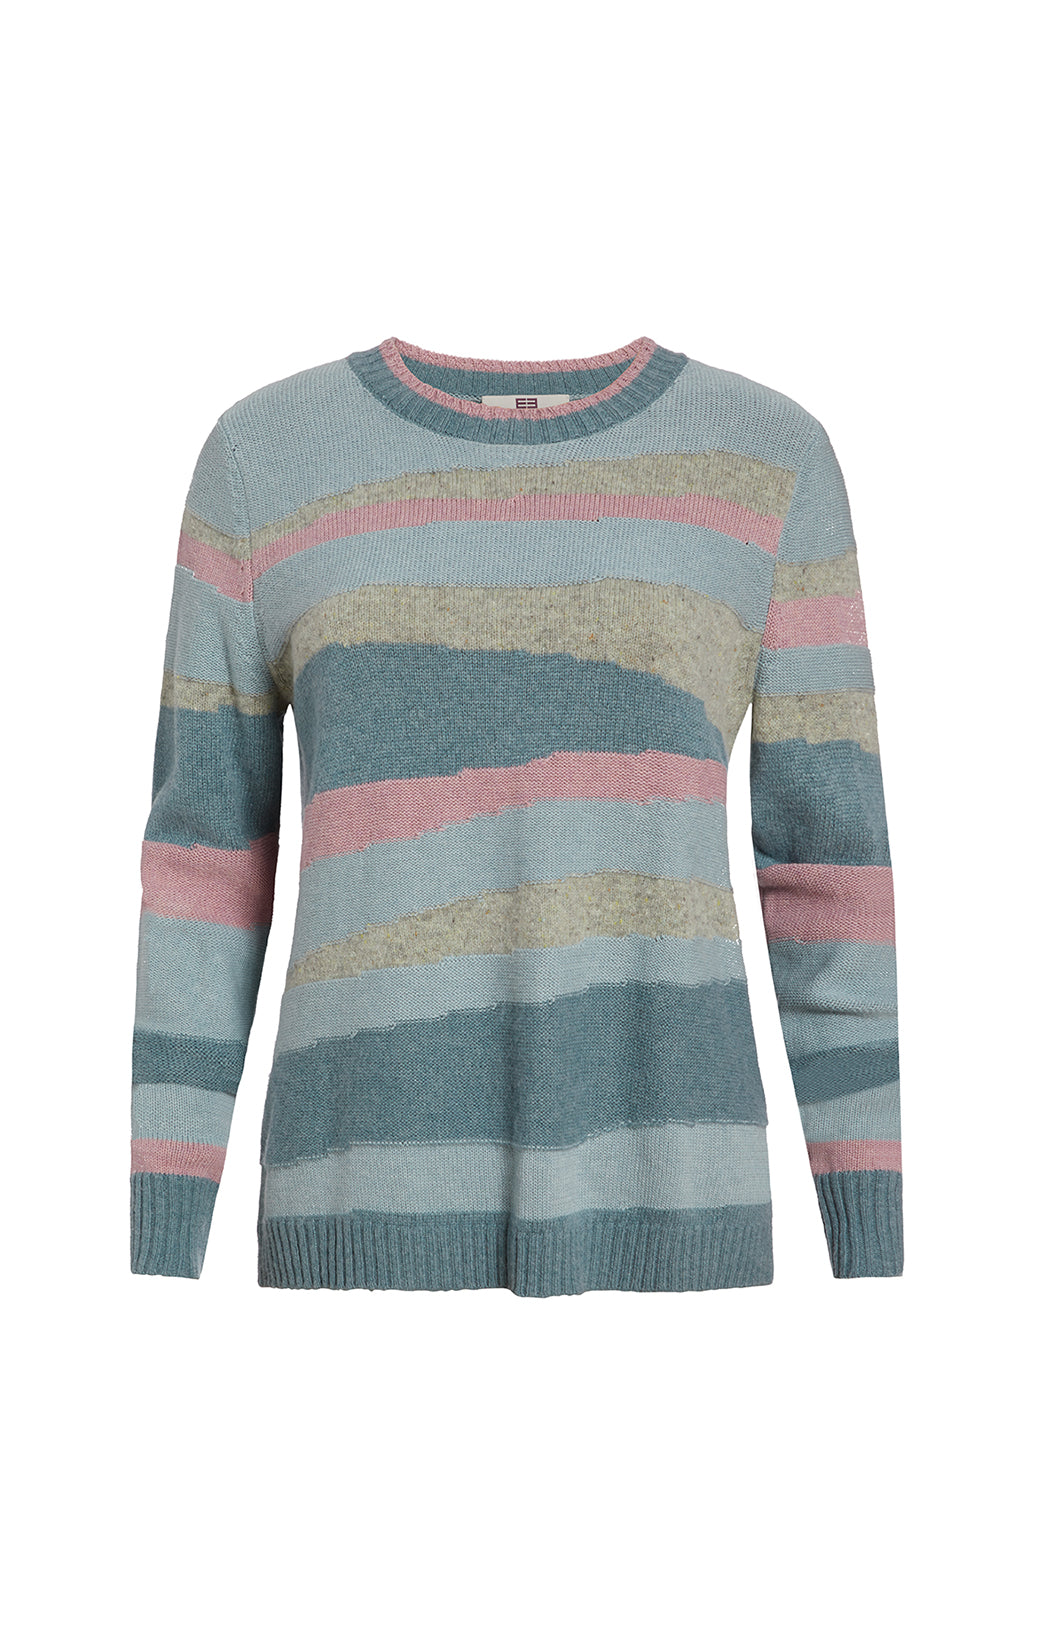 Mojave - Cashmere-Softened Funnel Neck
Sweater - Product Image